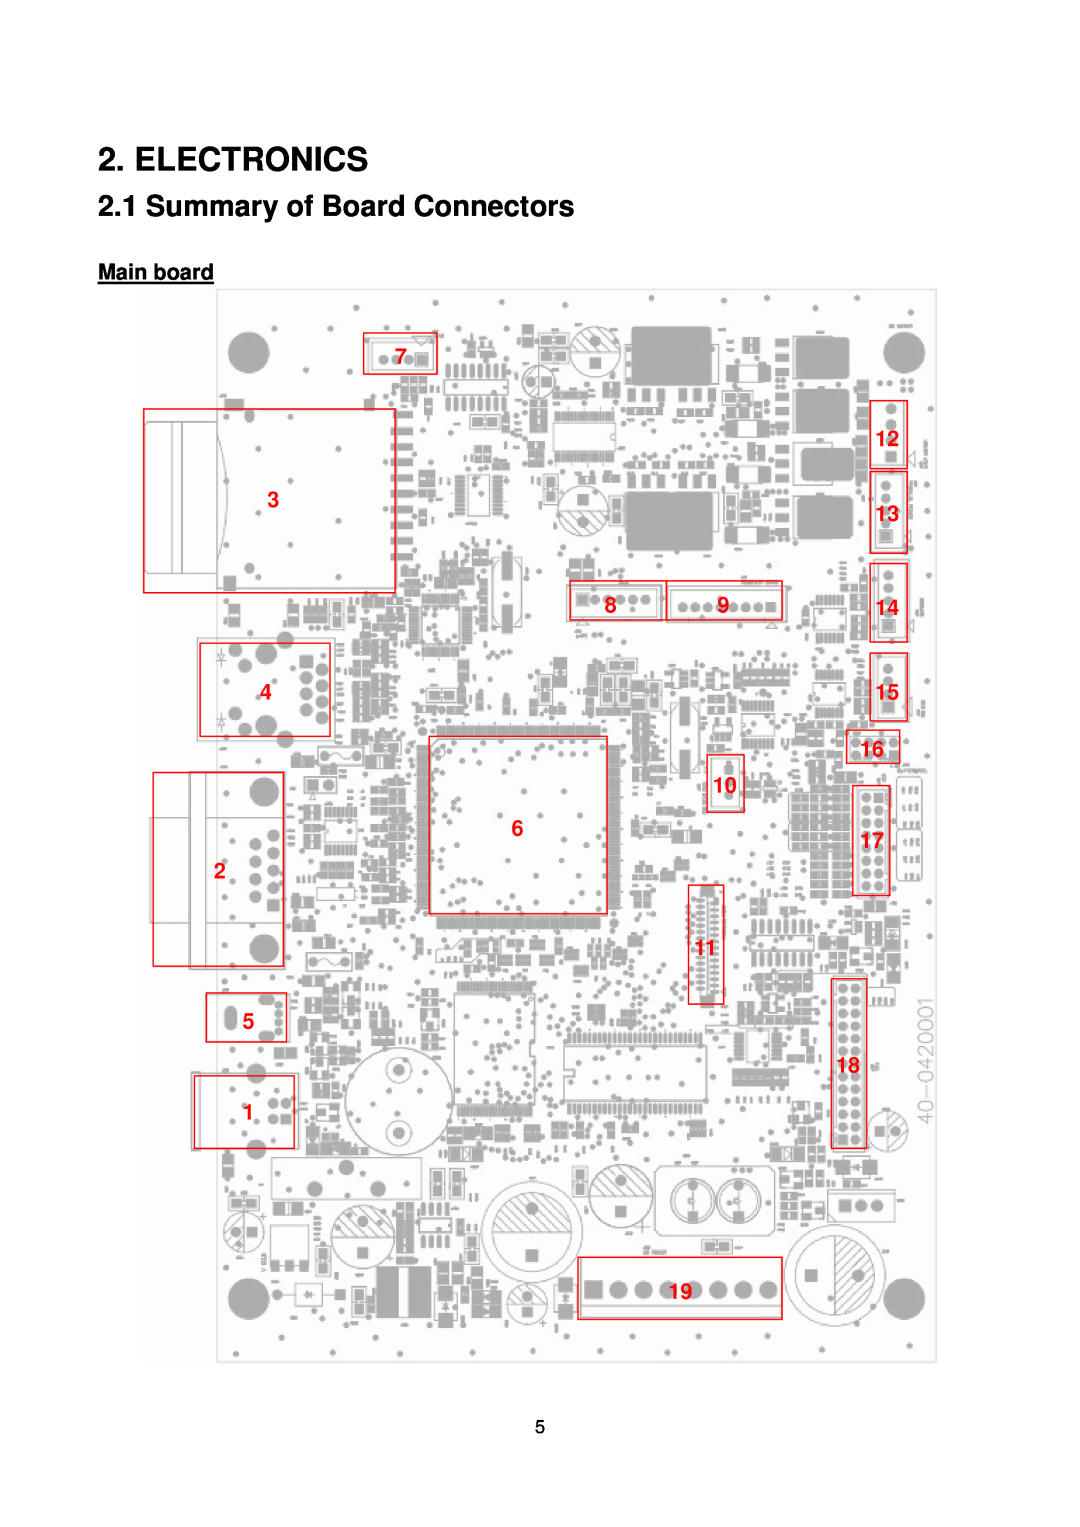 The Speaker Company me240 manual Electronics, Summary of Board Connectors 